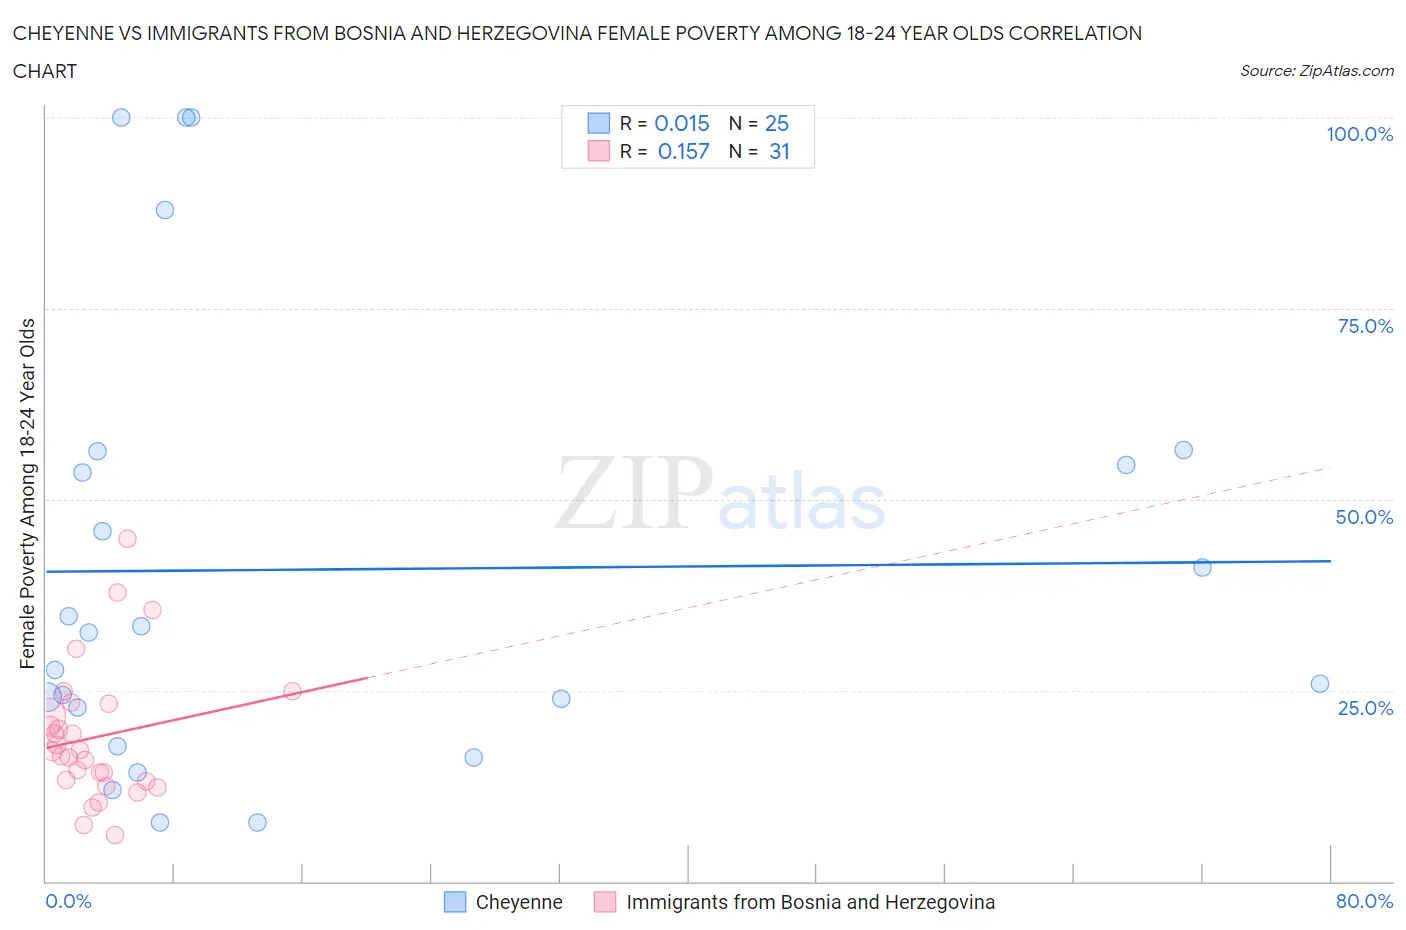 Cheyenne vs Immigrants from Bosnia and Herzegovina Female Poverty Among 18-24 Year Olds